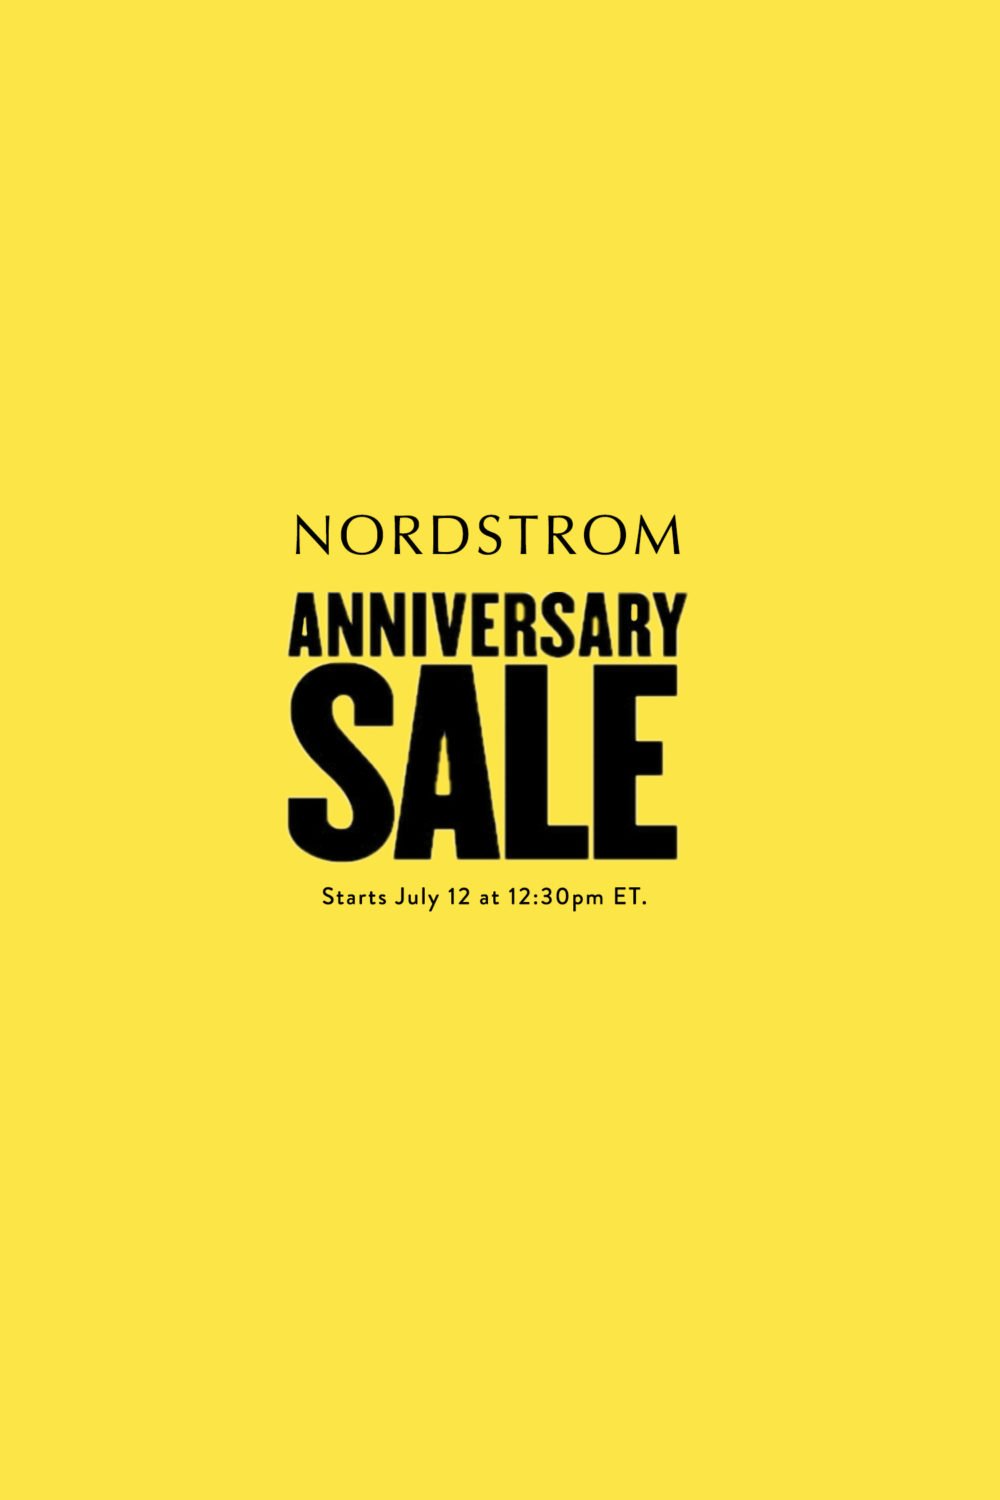 How to Prep for the 2018 Nordstrom Anniversary Sale! - Addison's Wonderland